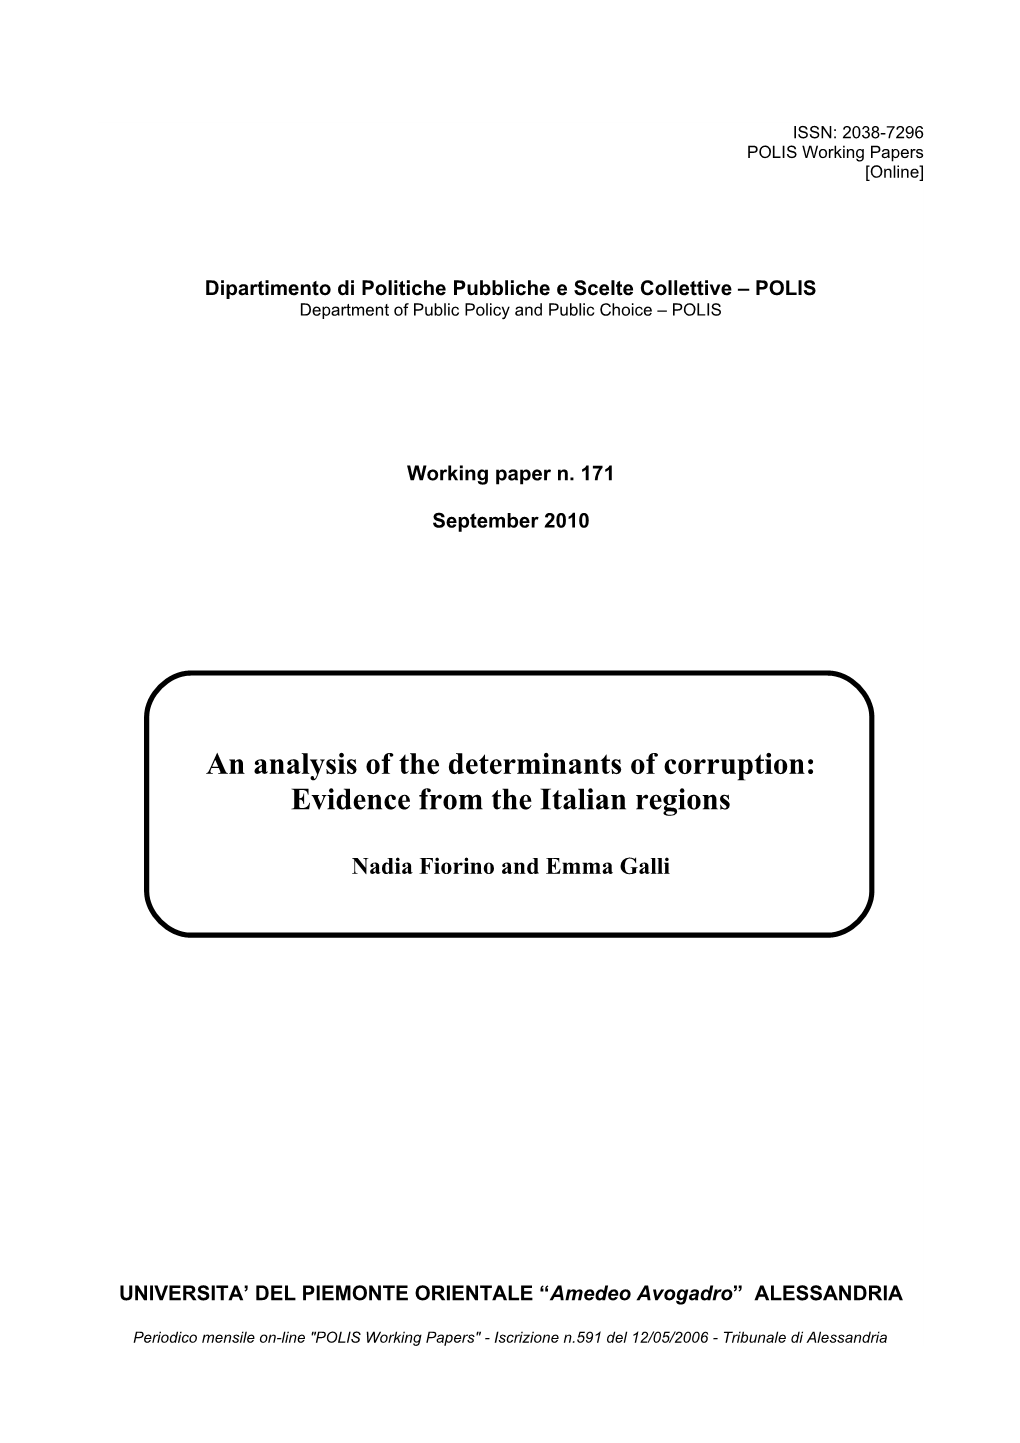 An Analysis of the Determinants of Corruption: Evidence from the Italian Regions